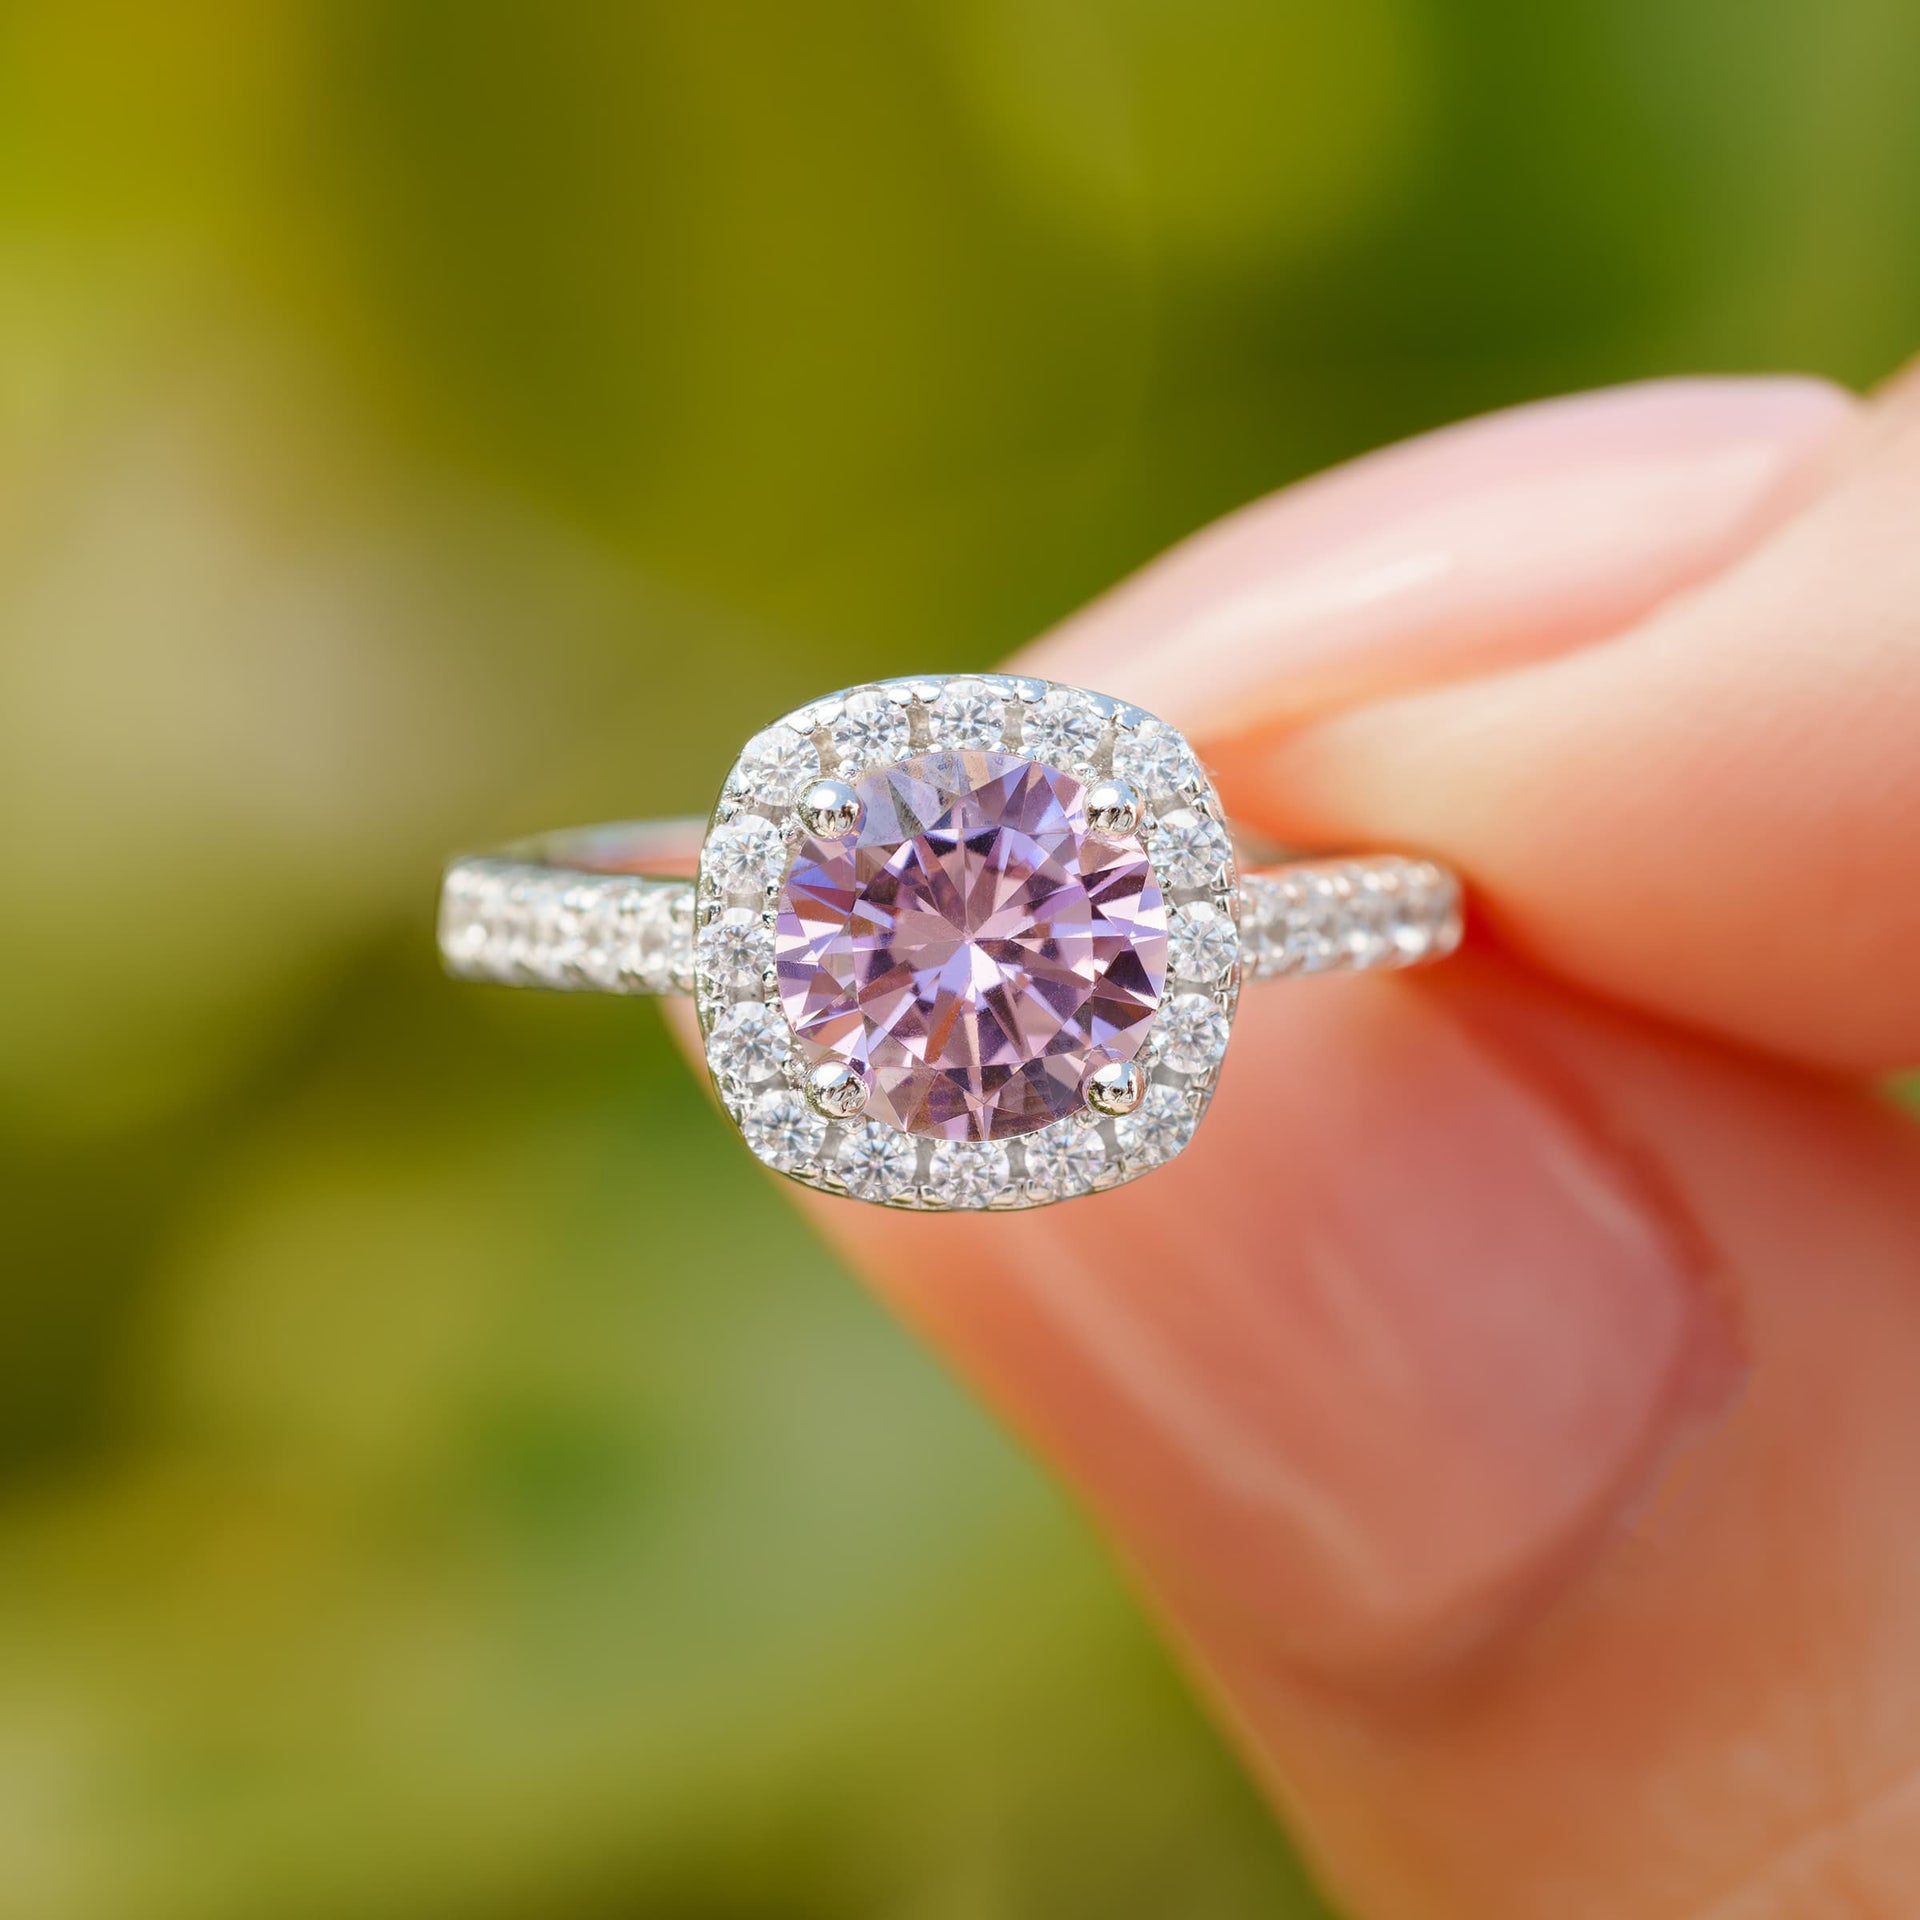 stunning halo pink engagement ring pinching with greenery in background